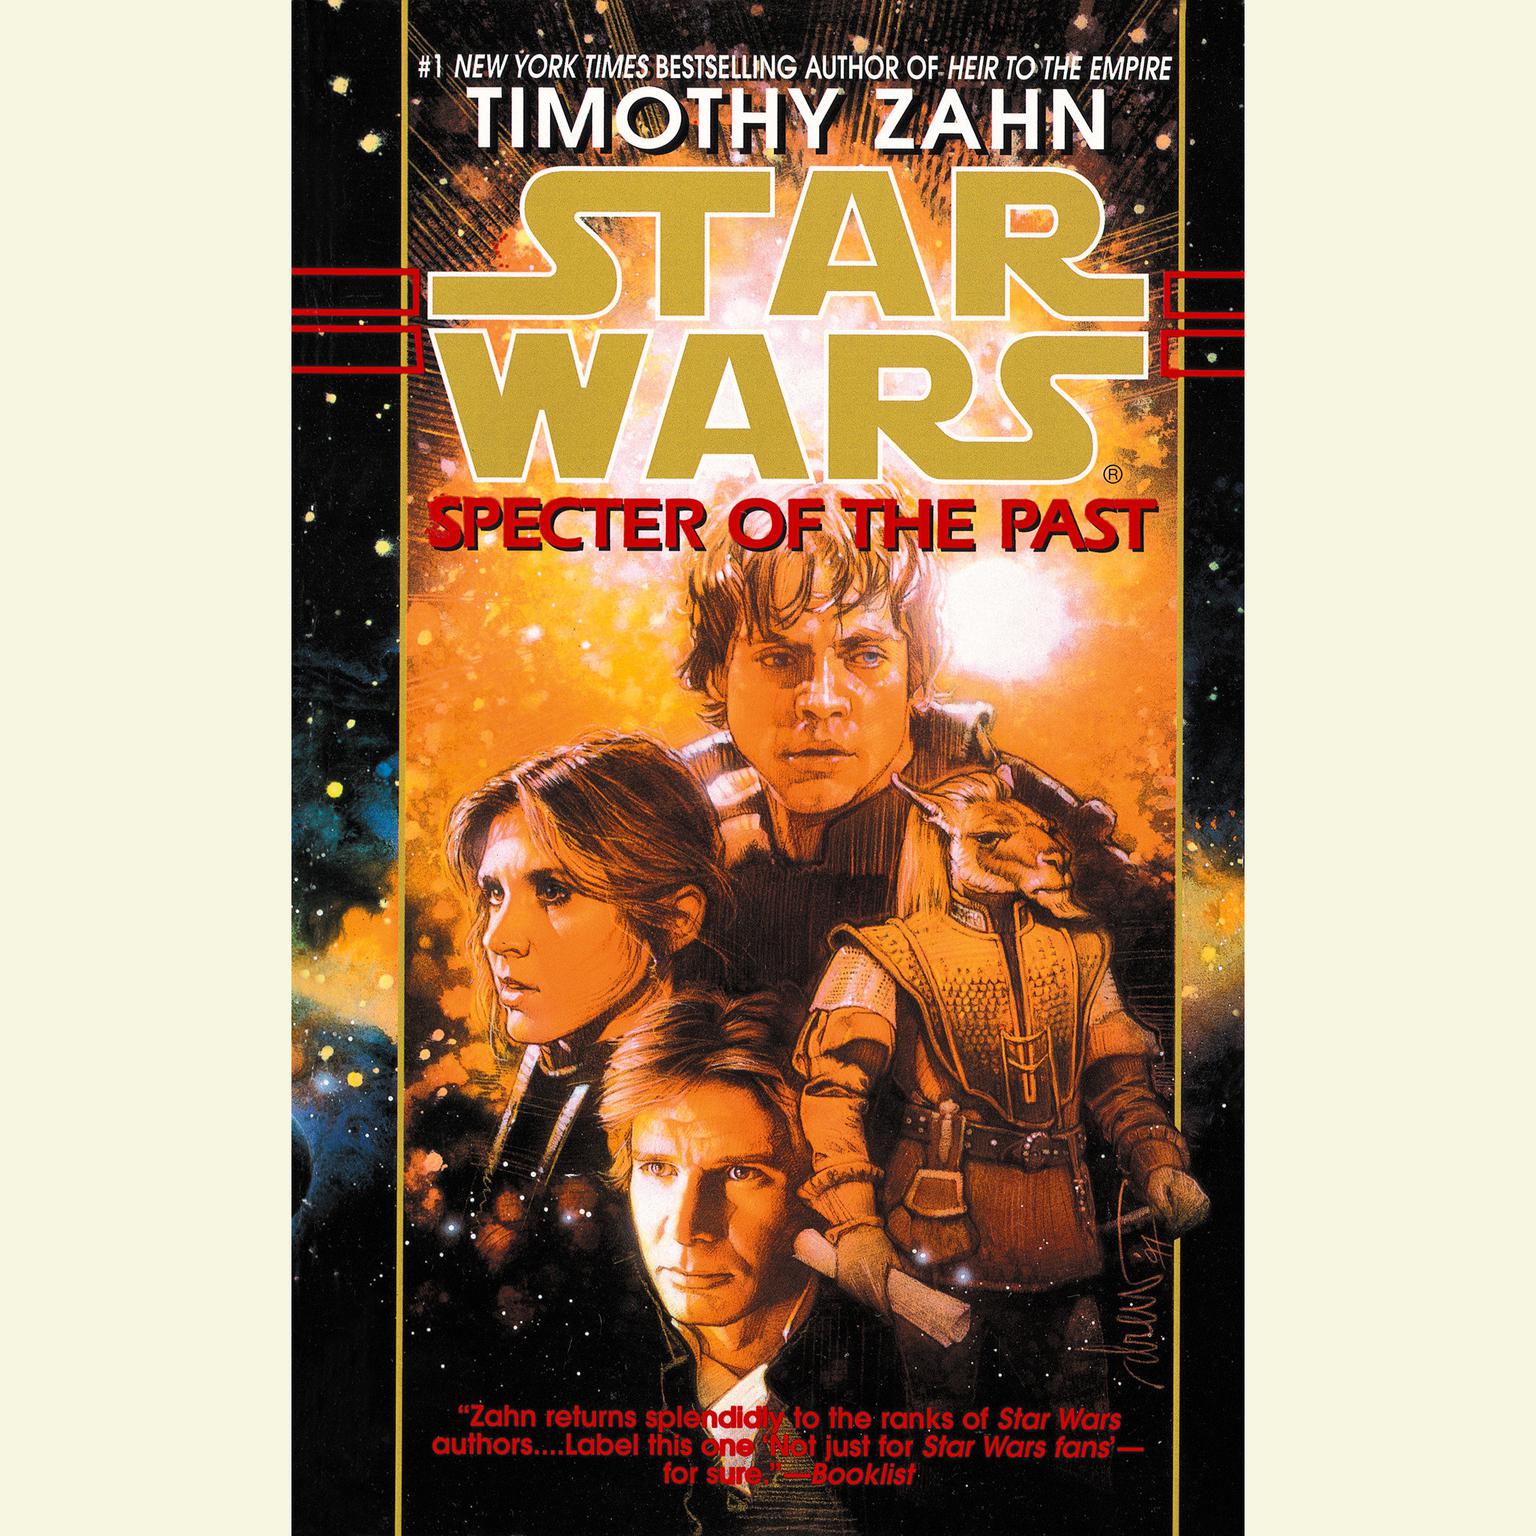 Specter of the Past: Star Wars Legends (The Hand of Thrawn): Book I Audiobook, by Timothy Zahn